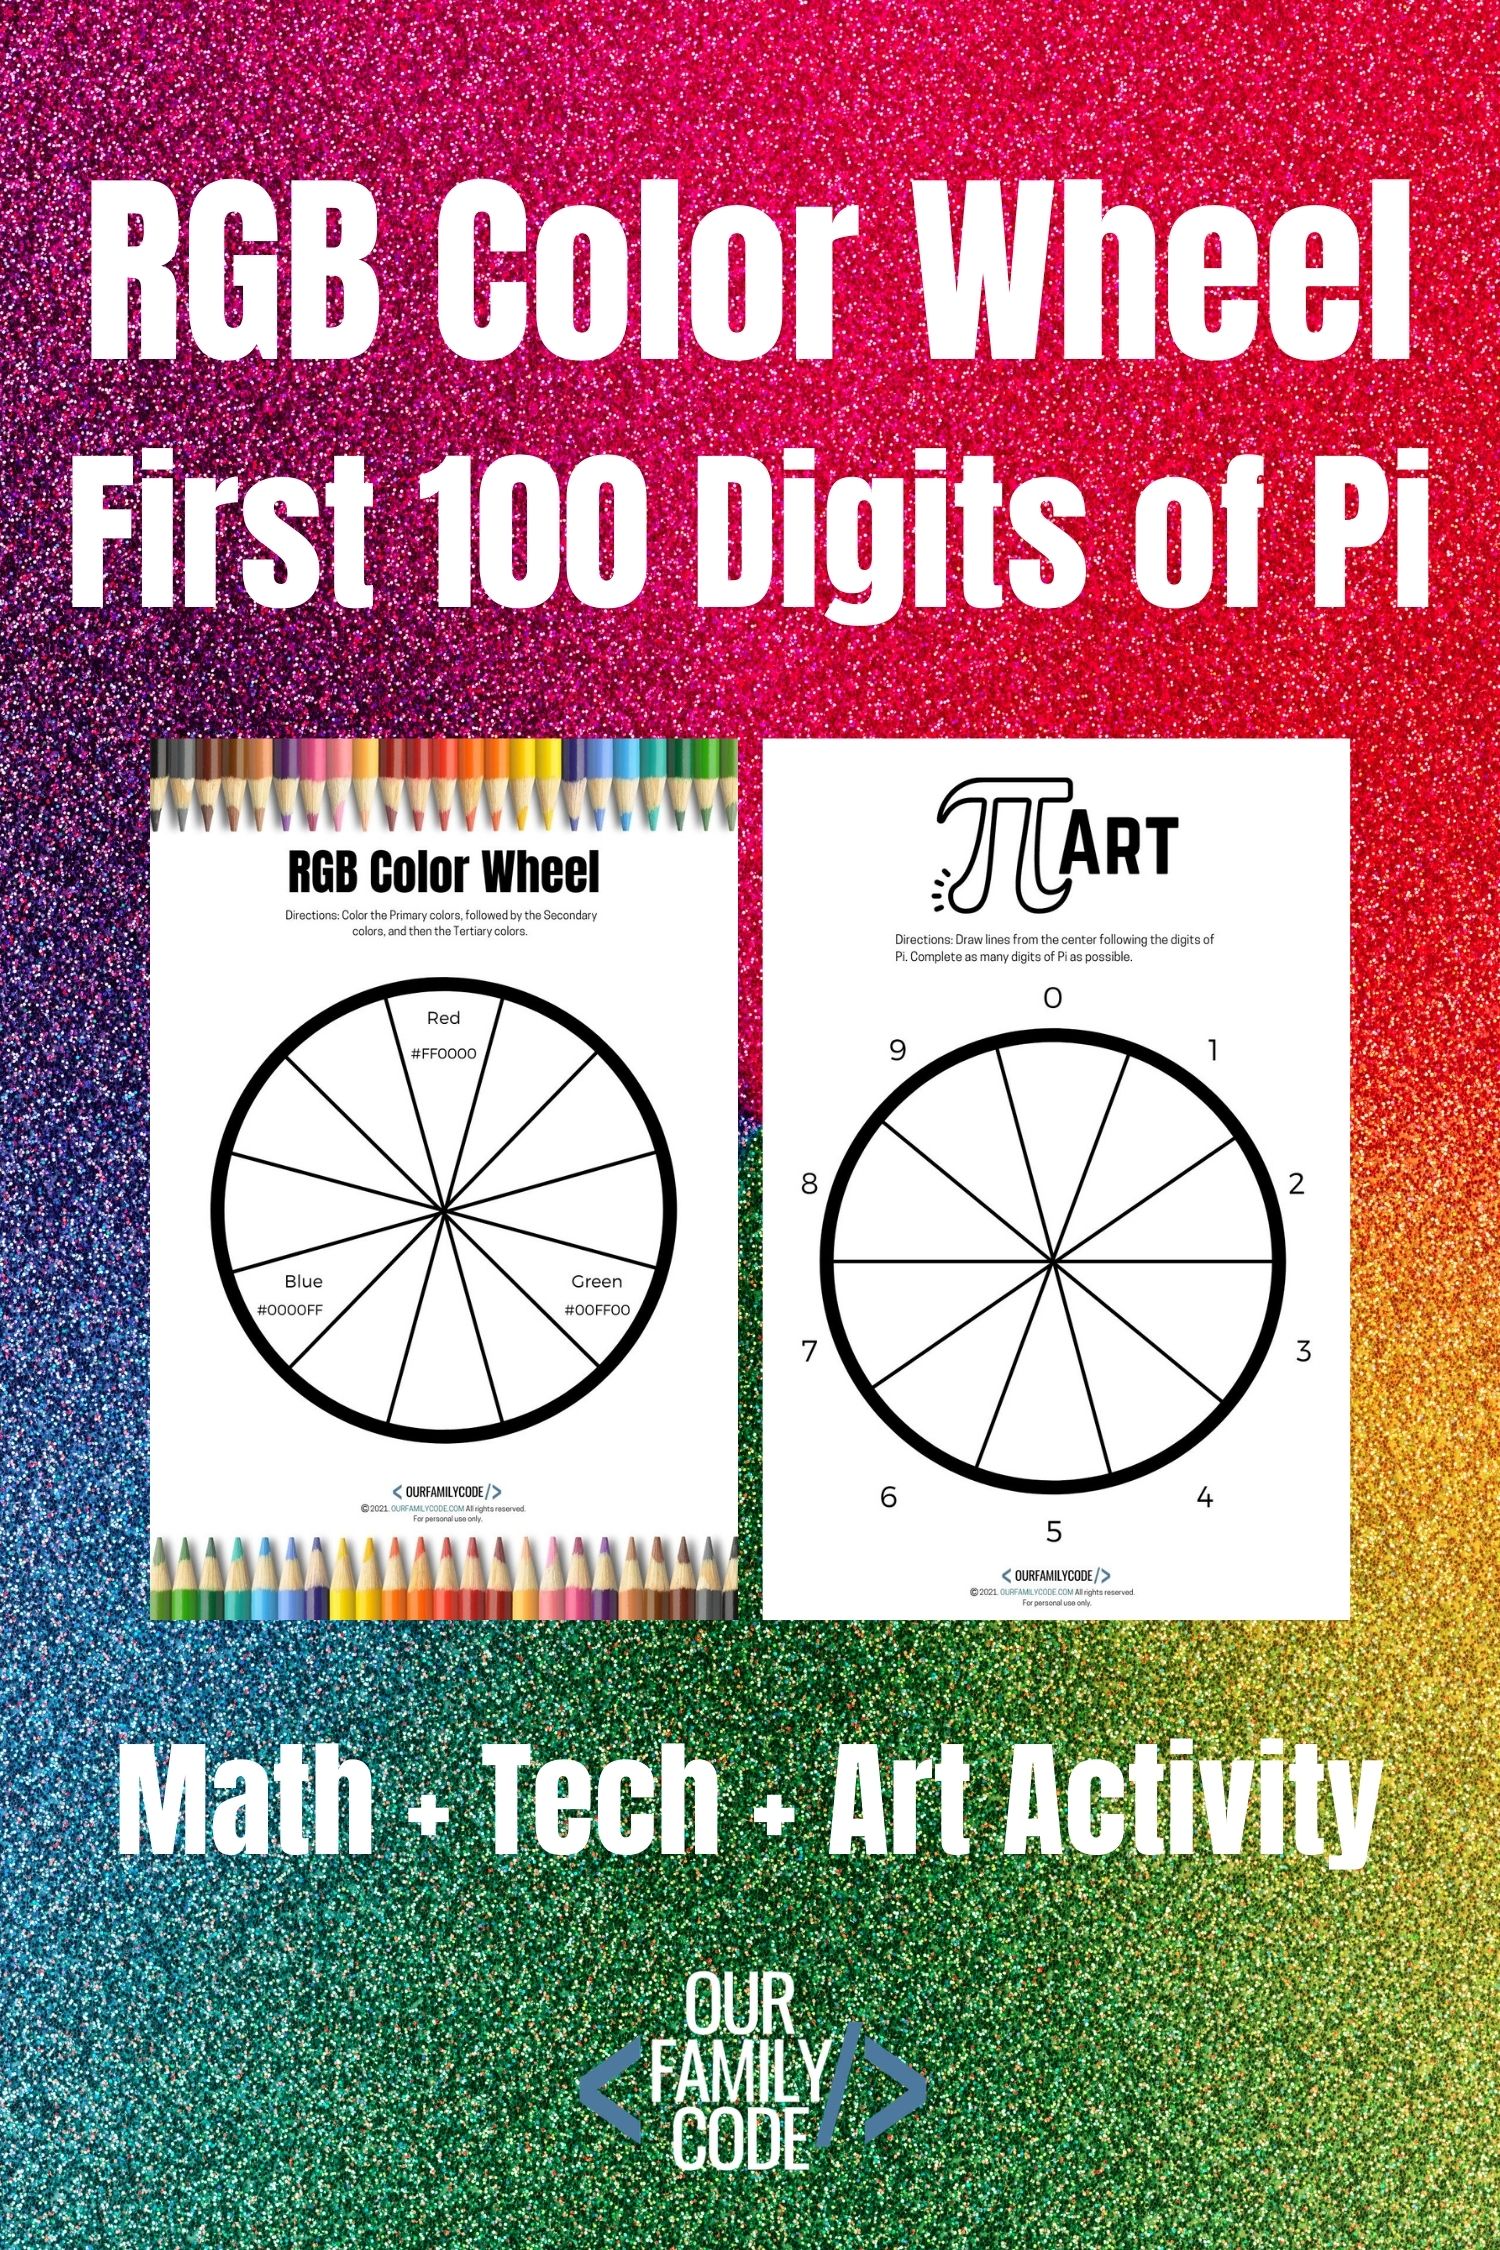 A picture of two math tech art activities on a rainbow color wheel background.